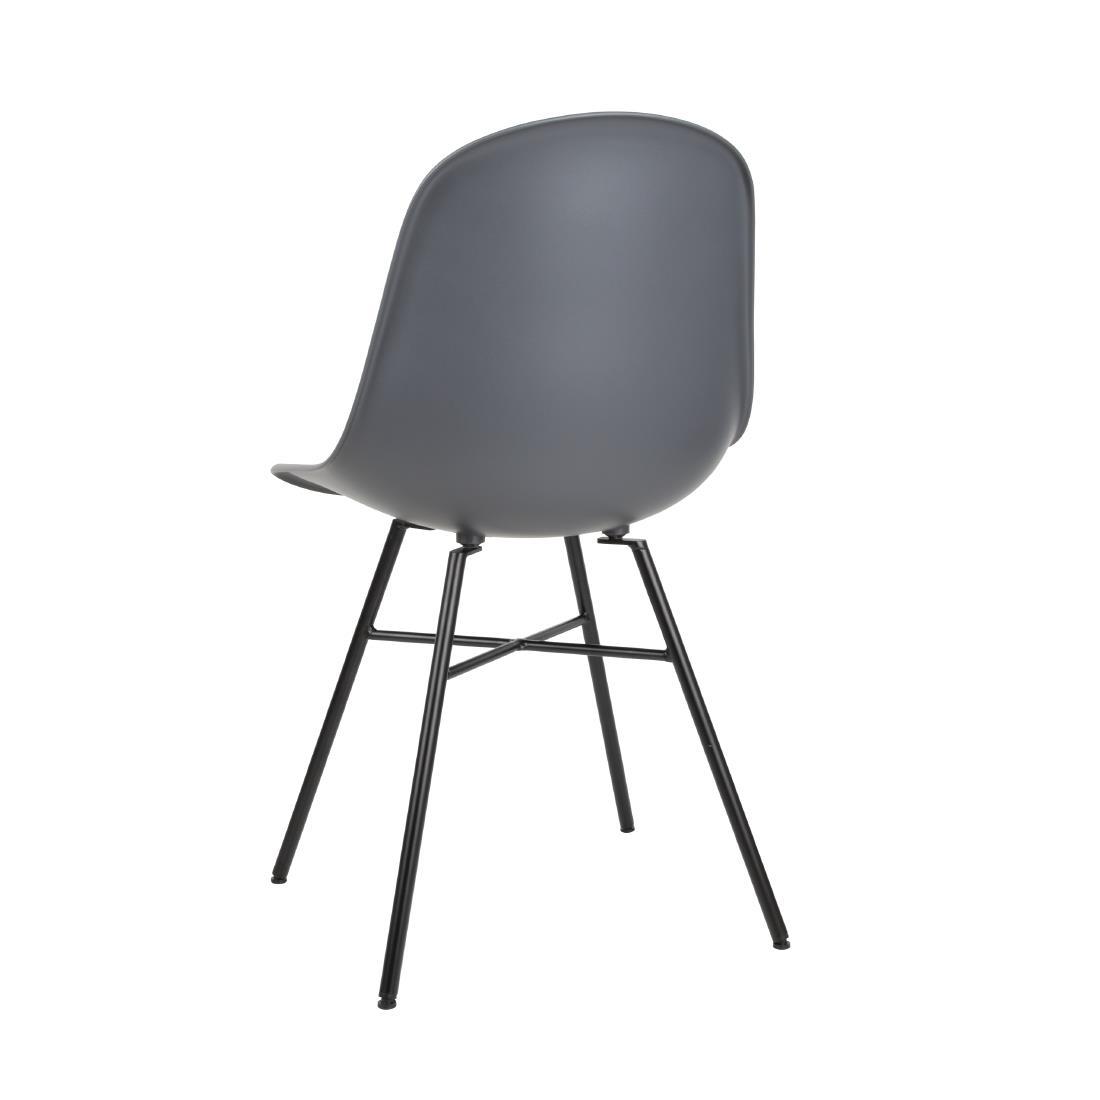 Bolero Arlo Side Chairs with Metal Frame Charcoal (Pack of 2) - DY347  - 3